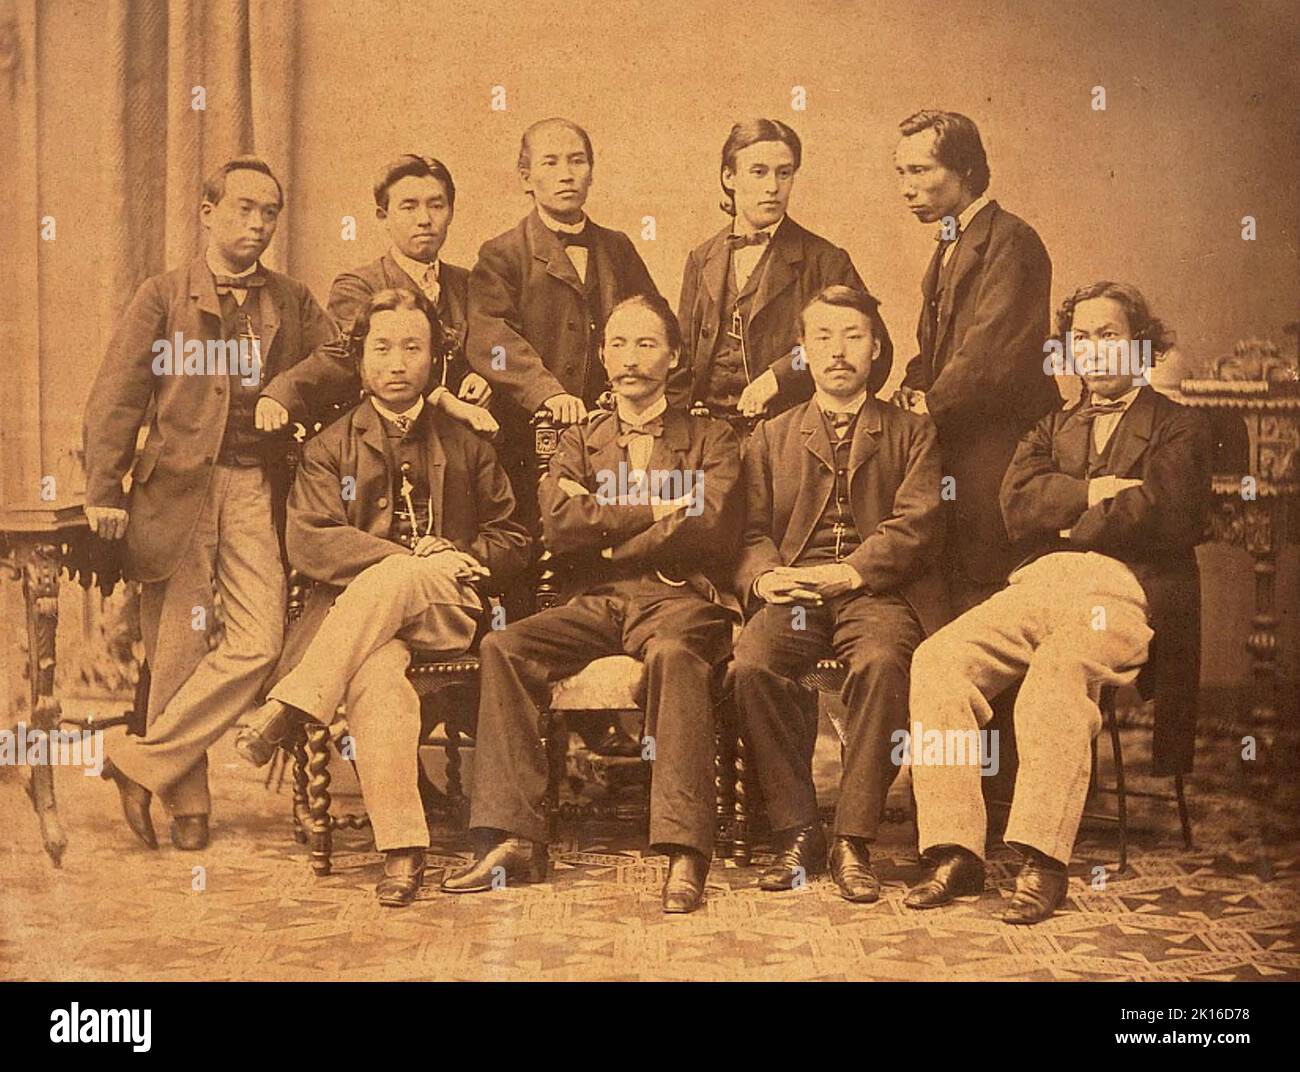 Students sent to Netherlands by Tokugawa Bakufu. They departed on June, 18th 1862 (Bunkyu, Edo period). Enomoto Takeaki (back left 3), Nishi Amane (front right1 ) are seen. This photo was taken at Netherlands in 1865. Stock Photo